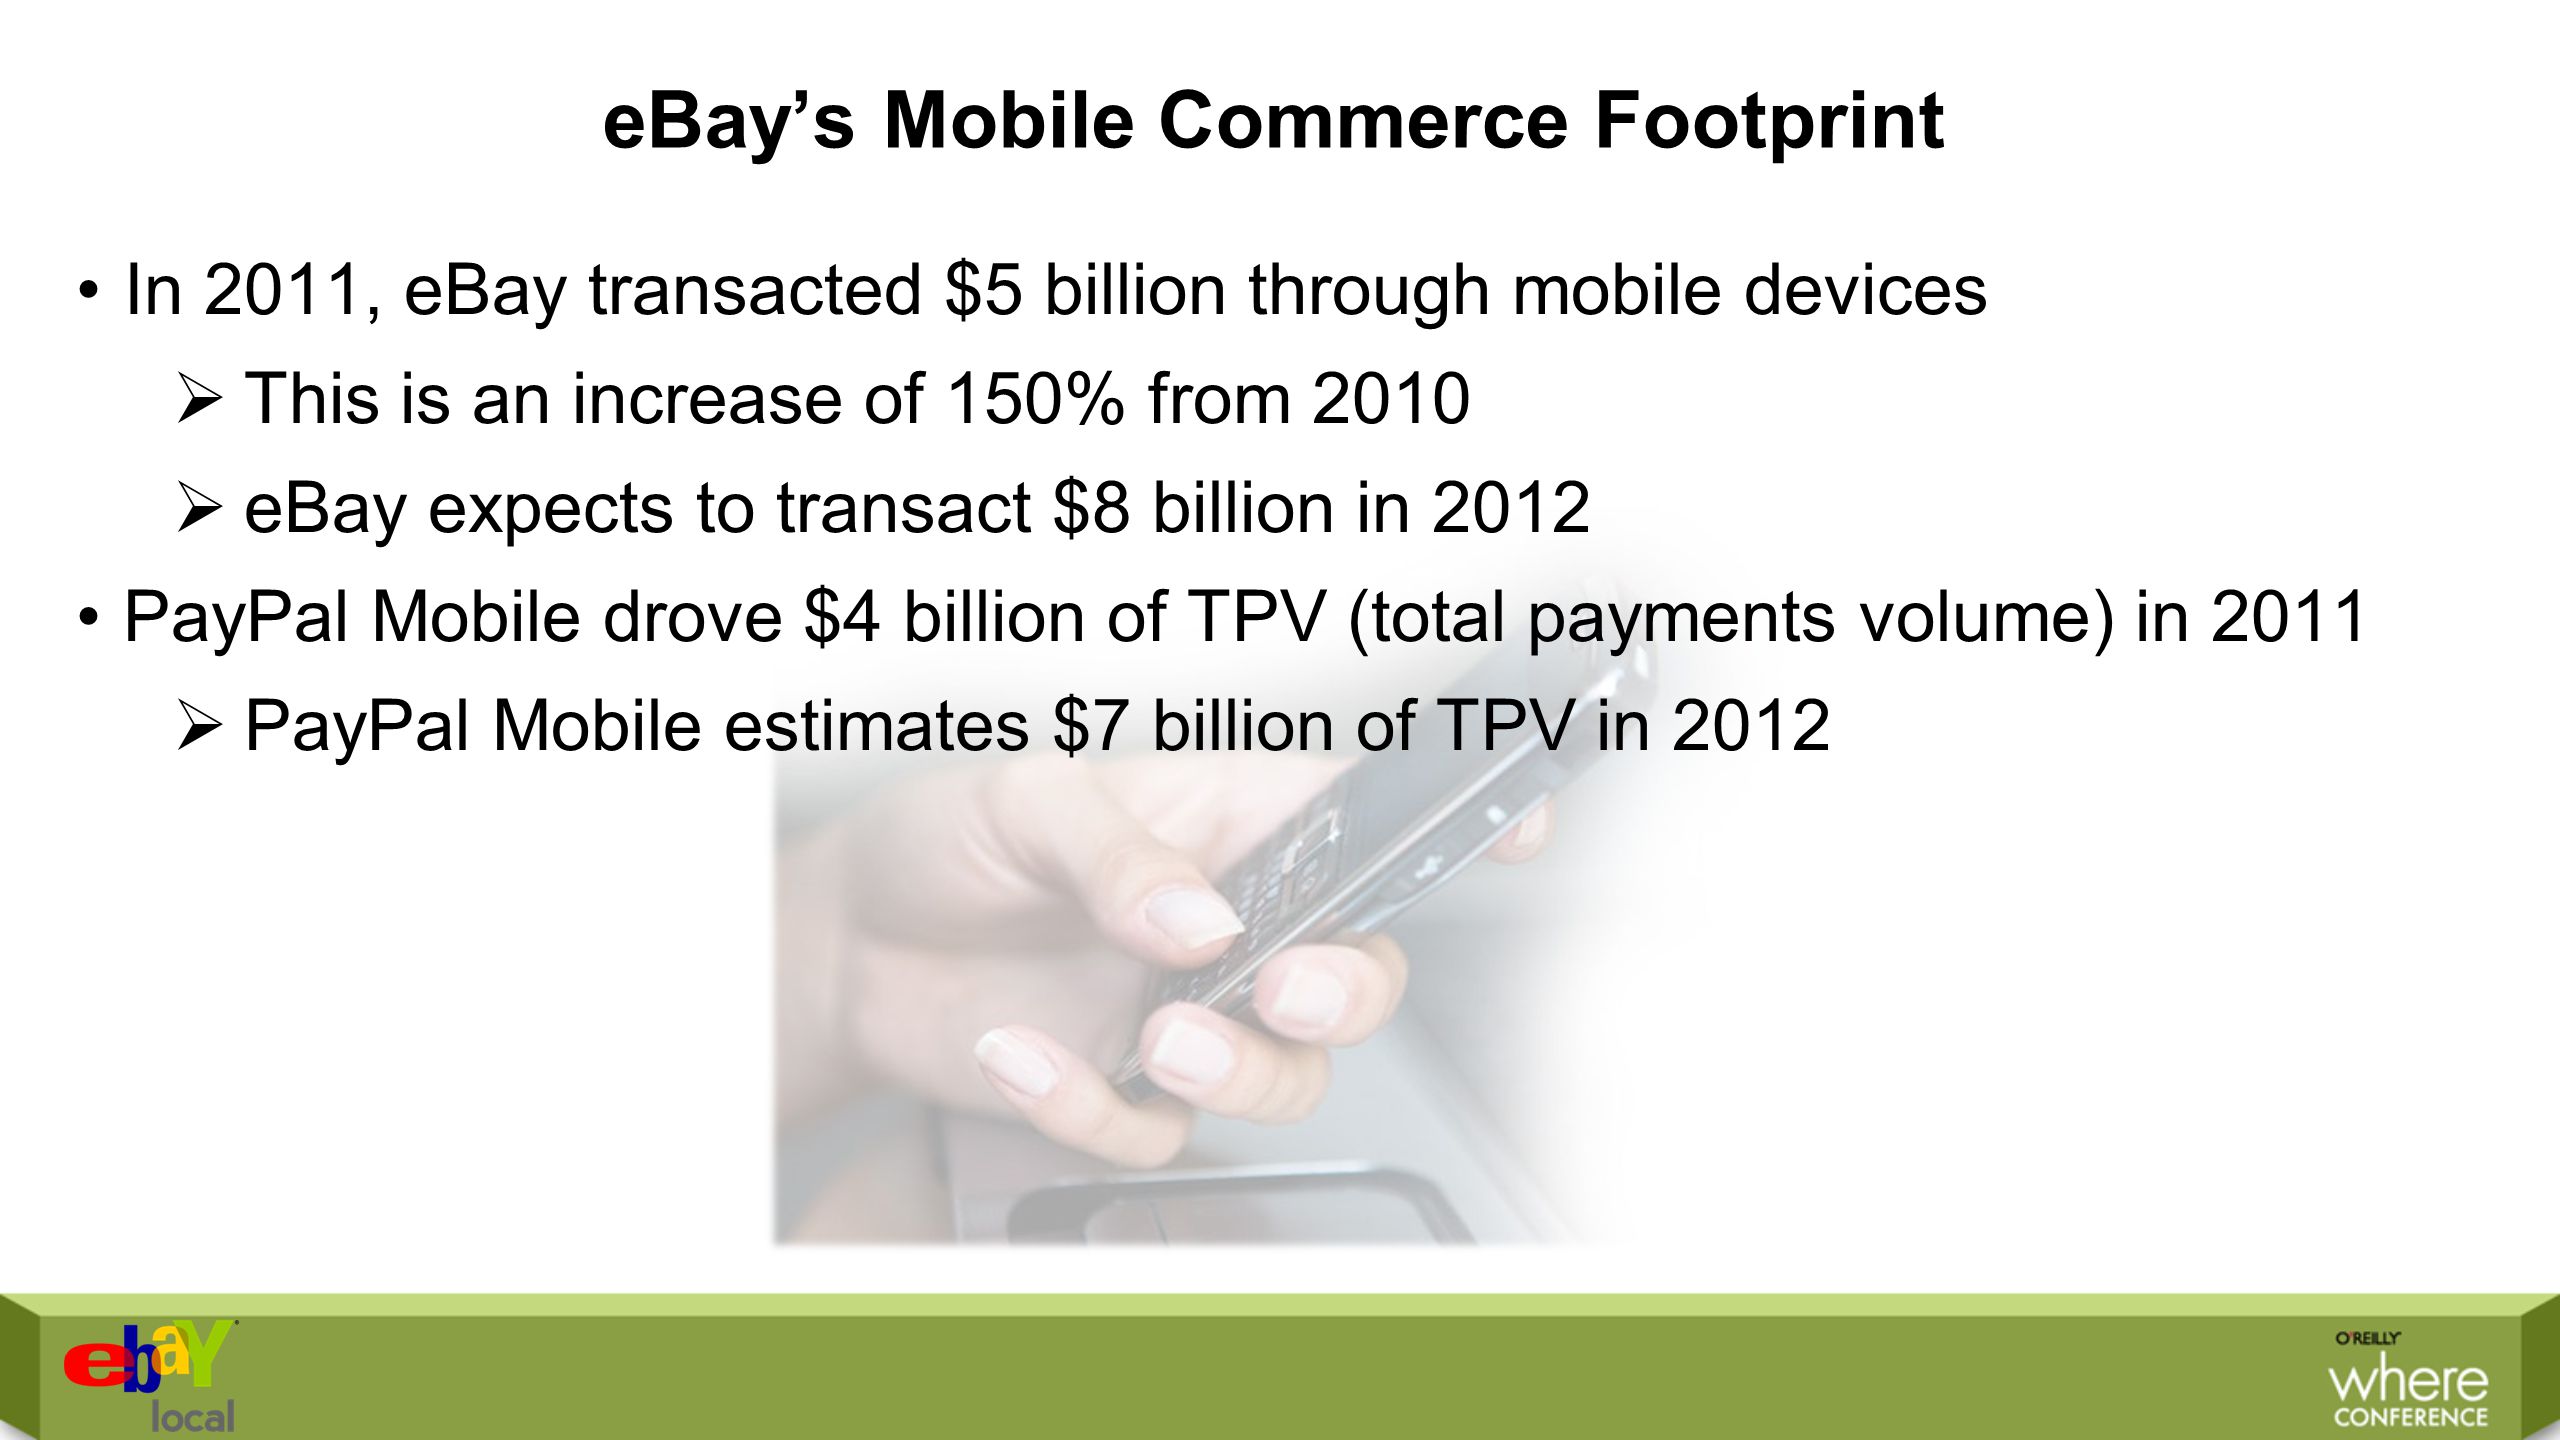 eBay’s Mobile Commerce Footprint In 2011, eBay transacted $5 billion through mobile devices  This is an increase of 150% from 2010  eBay expects to transact $8 billion in 2012 PayPal Mobile drove $4 billion of TPV (total payments volume) in 2011  PayPal Mobile estimates $7 billion of TPV in 2012